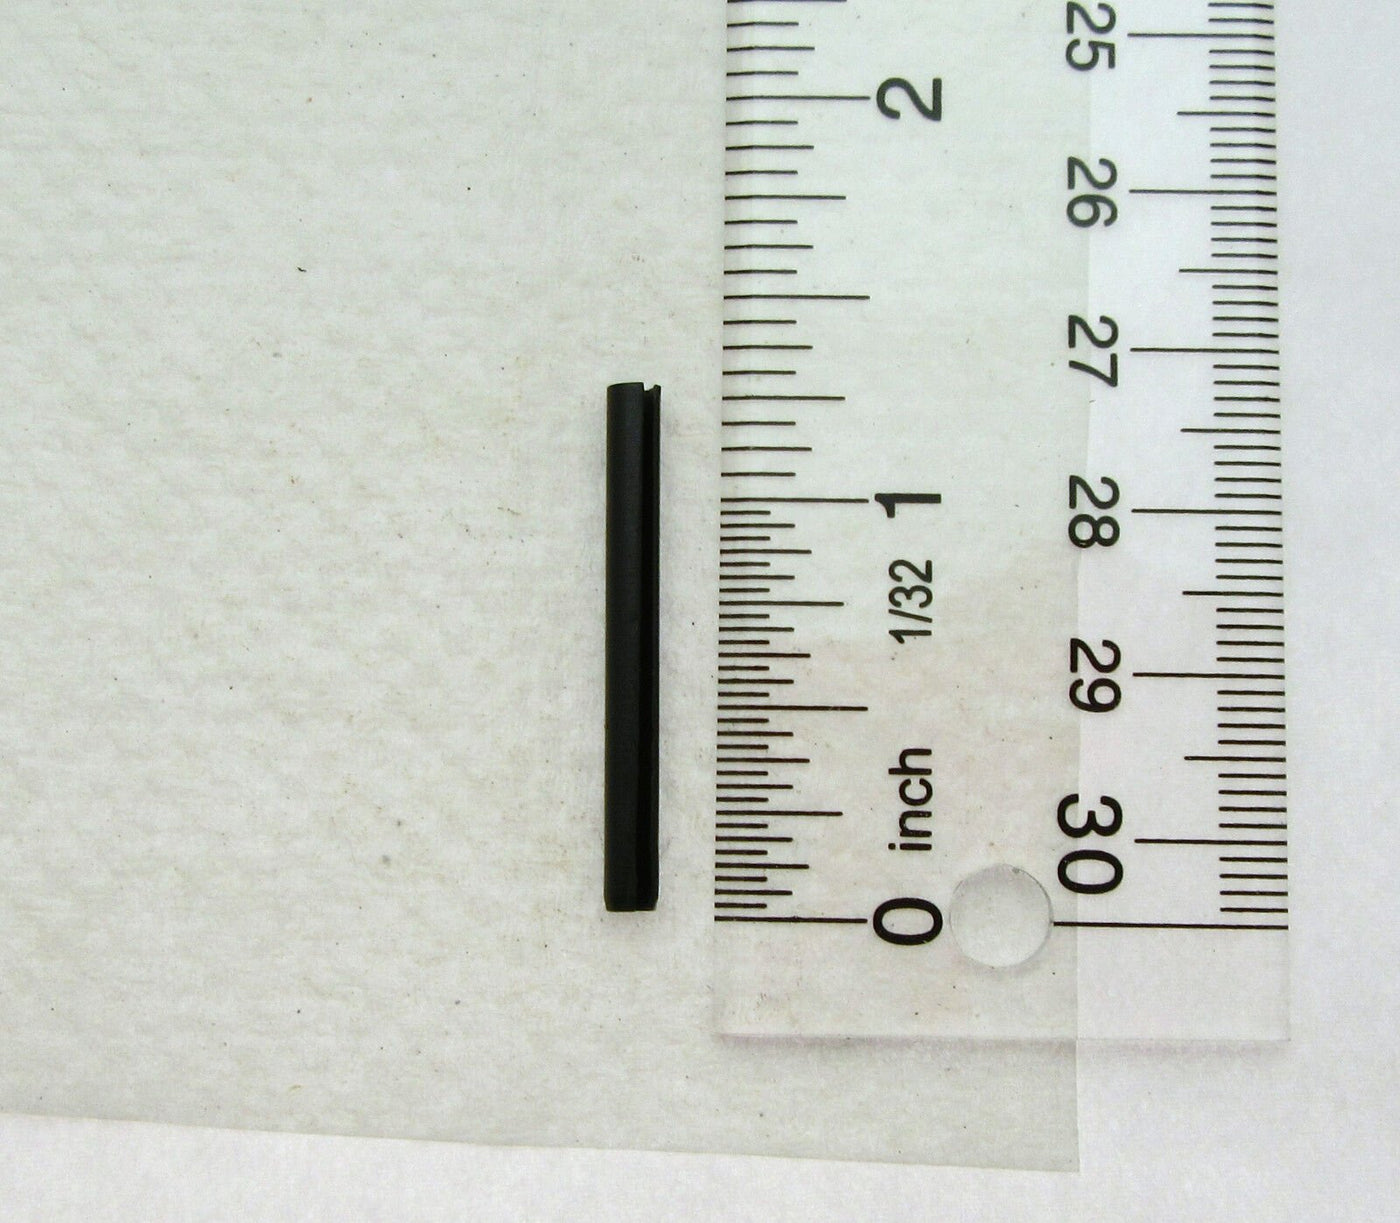 Spring Pin ( Roll Pin ) ~ 1/8 inch X 1 1/4" length ~ Heat Treated Spring Steel